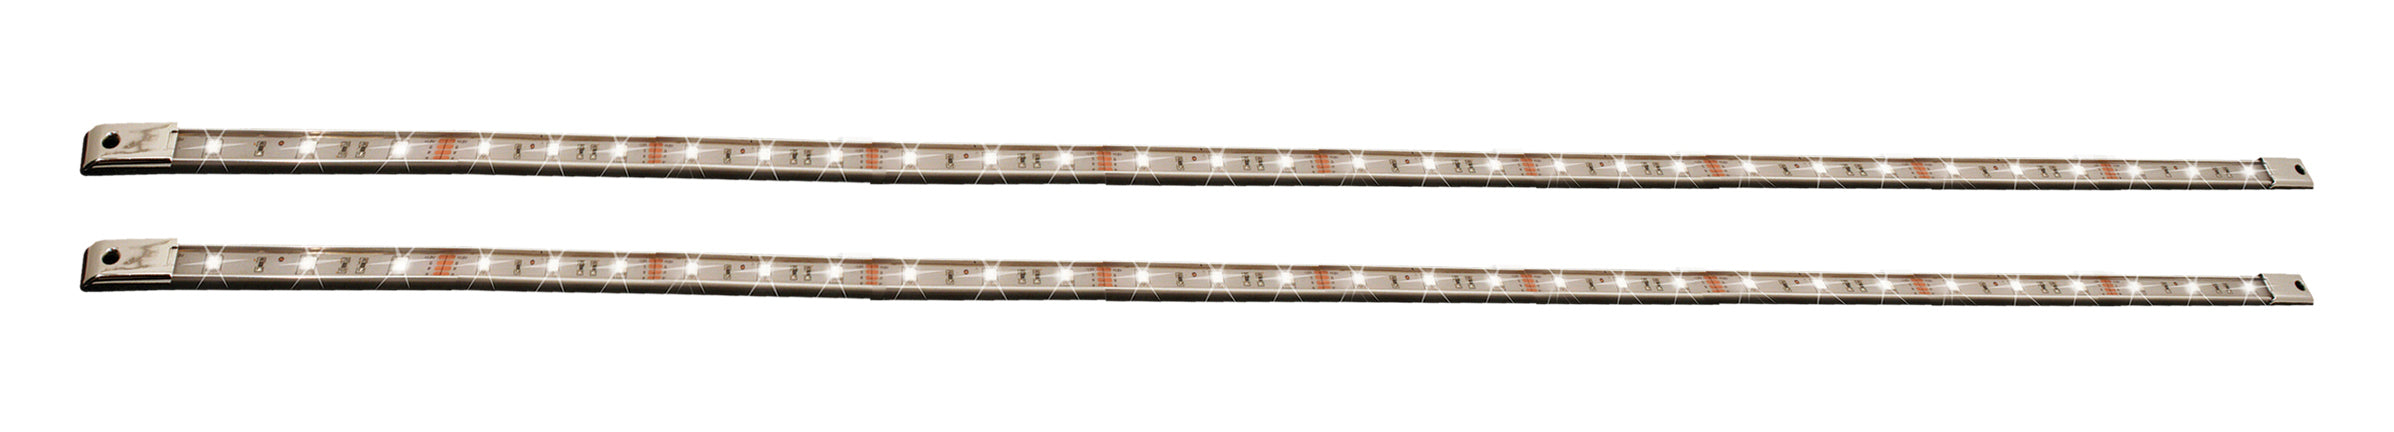 48in Ultra Bright LED Ground Clearance Light for Trucks (Pair) - USA Made Race Sport Lighting